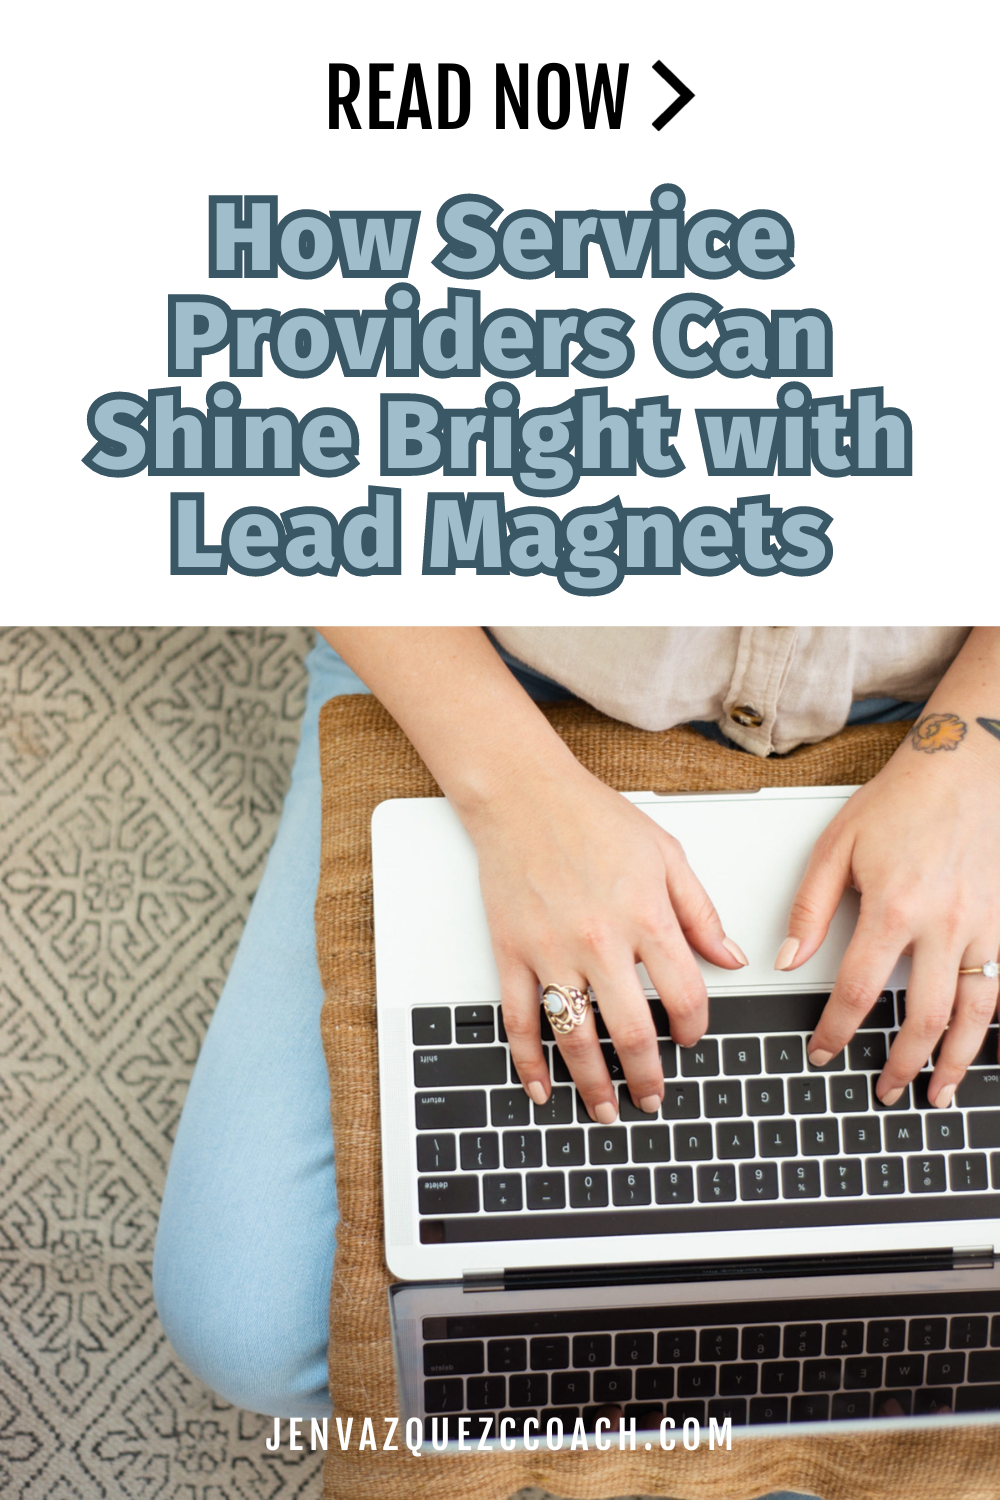 How Service Providers Can Shine Bright with Lead Magnets by Jen Vazquez Media jenvazquezcoach.com